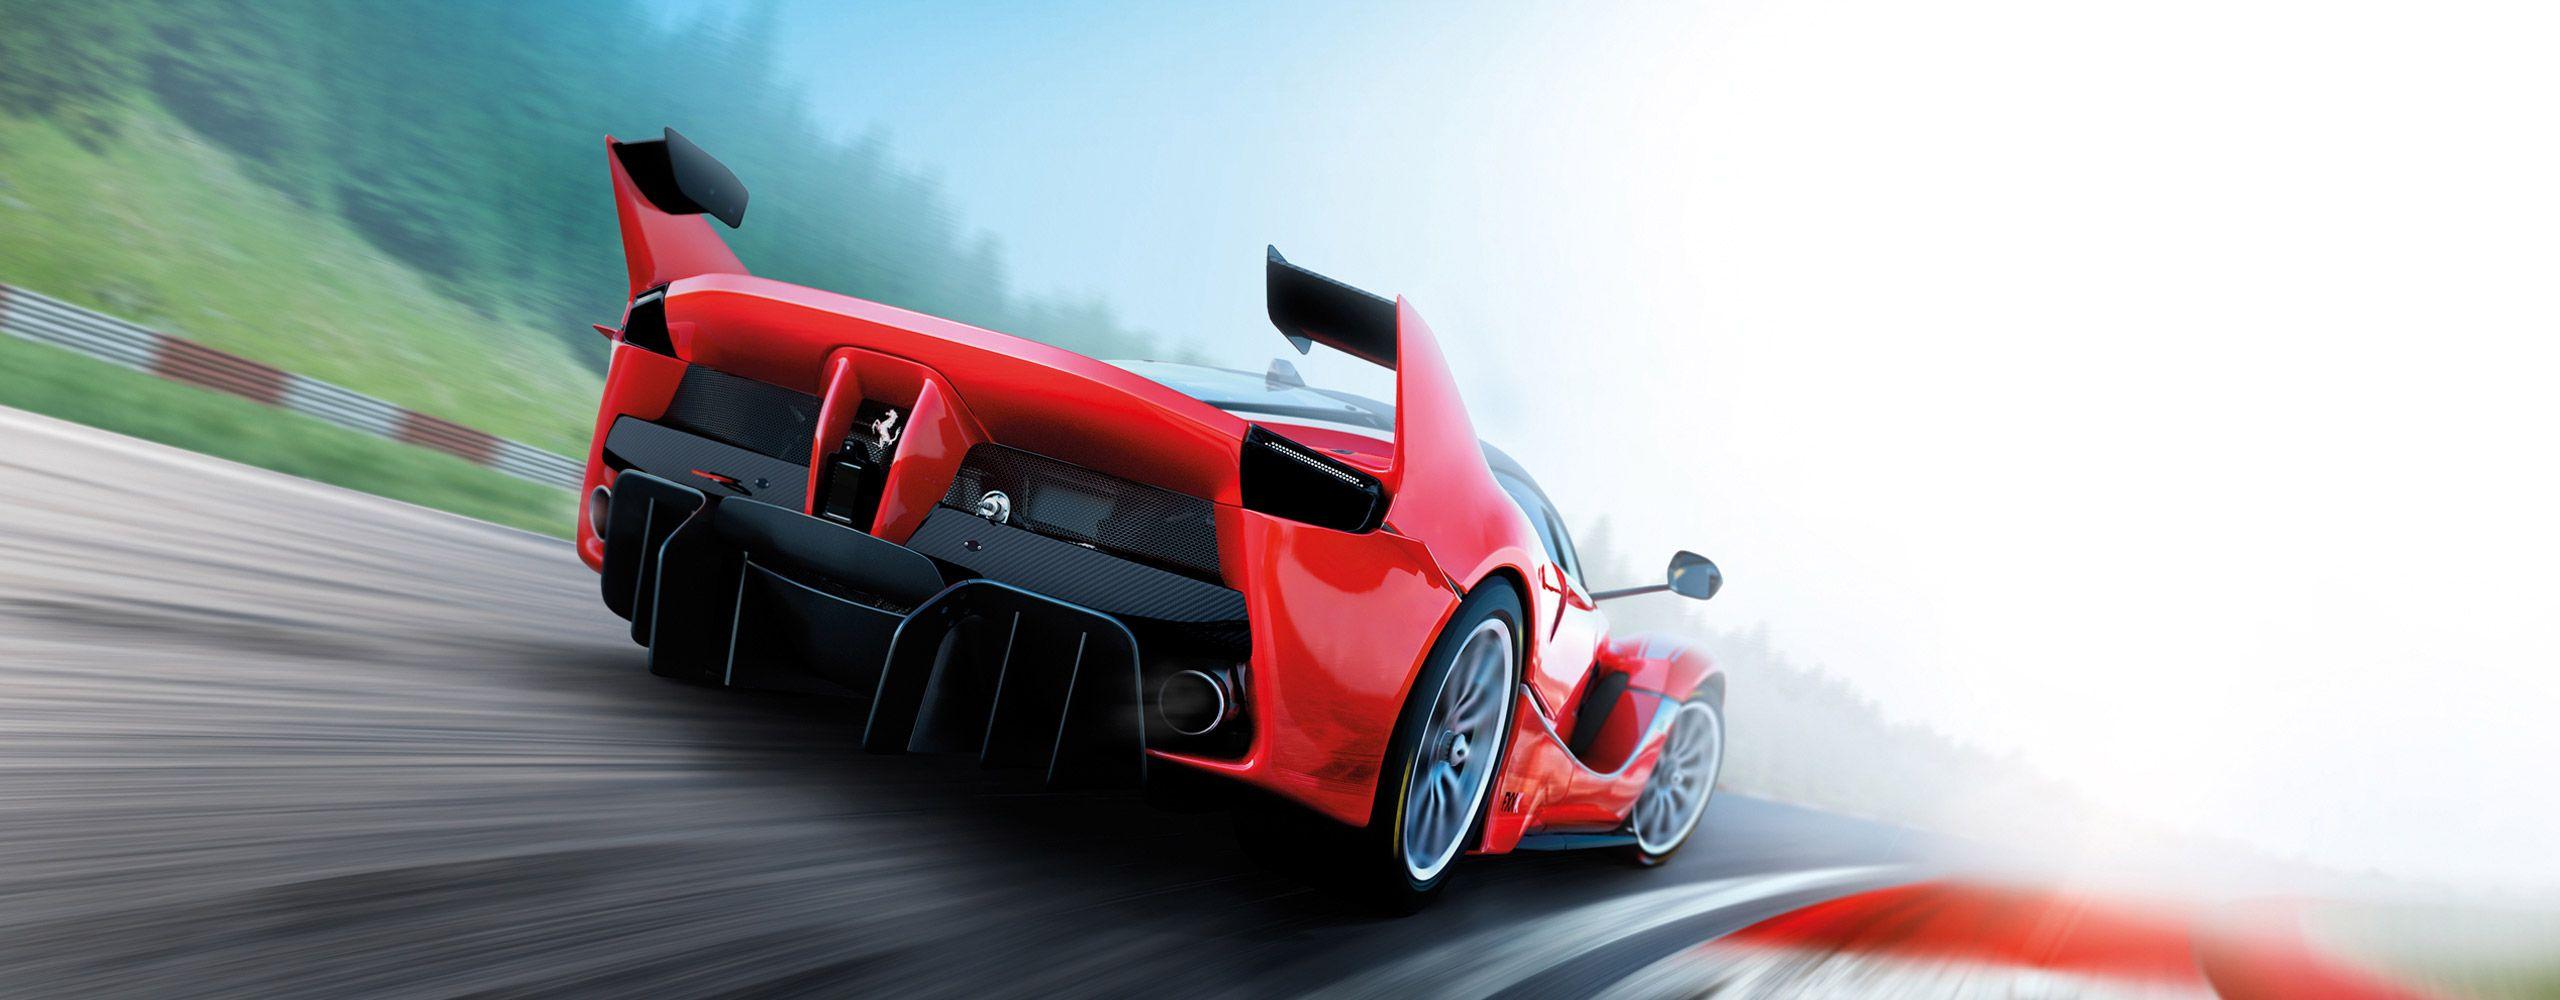 Assetto Corsa HD Wallpaper and Background Image